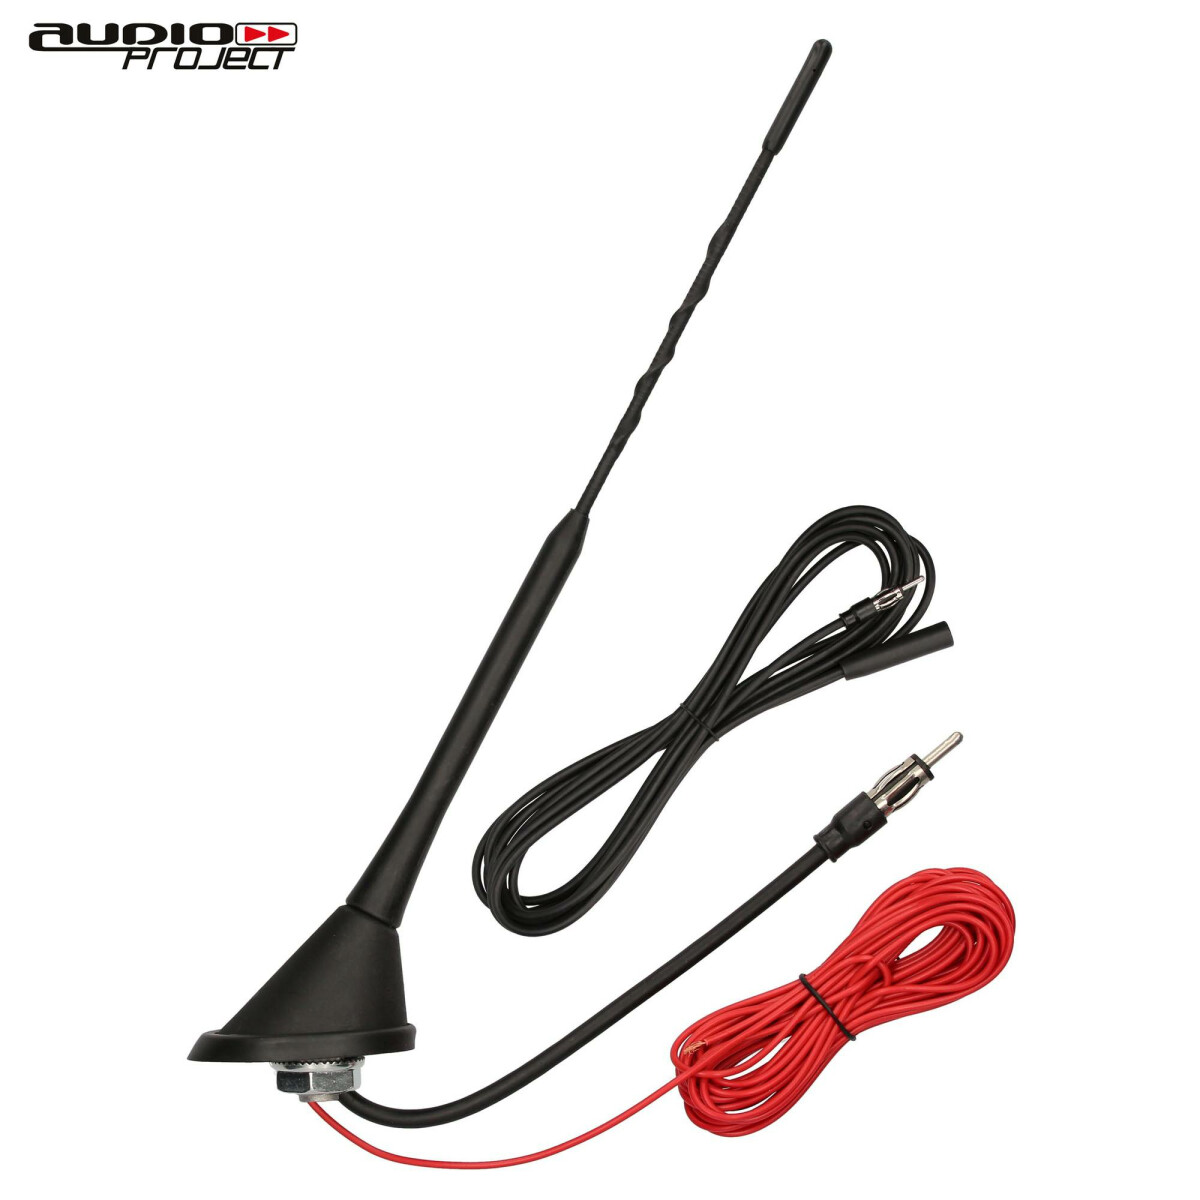 Audioproject A288 Autoantenne 28cm Fuß 5m Strom Kabel AM FM UKW